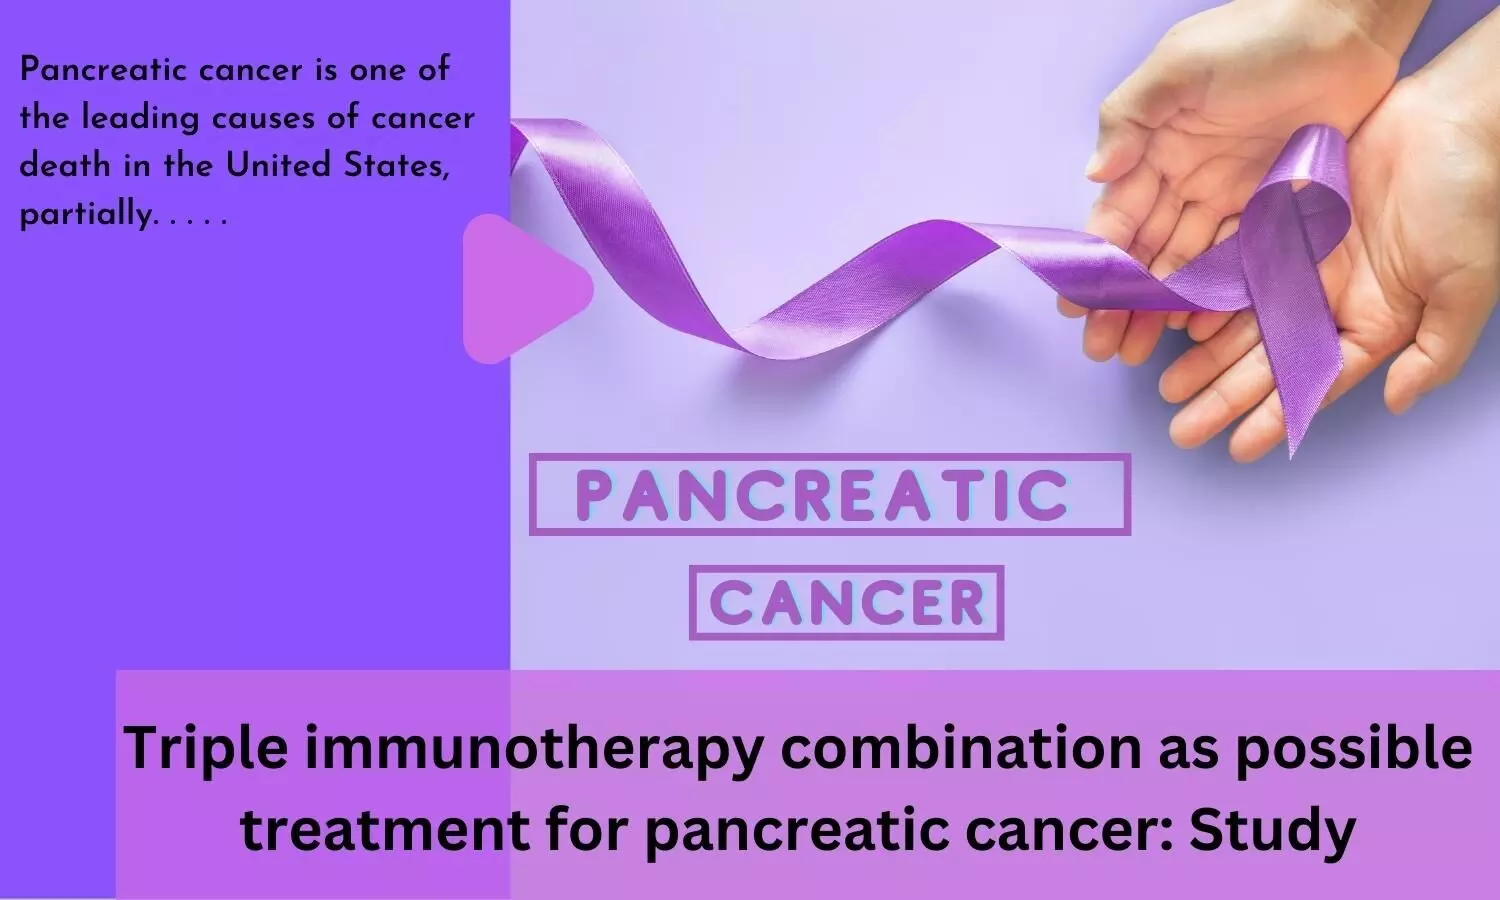 Triple immunotherapy combination as possible treatment for pancreatic cancer: Study